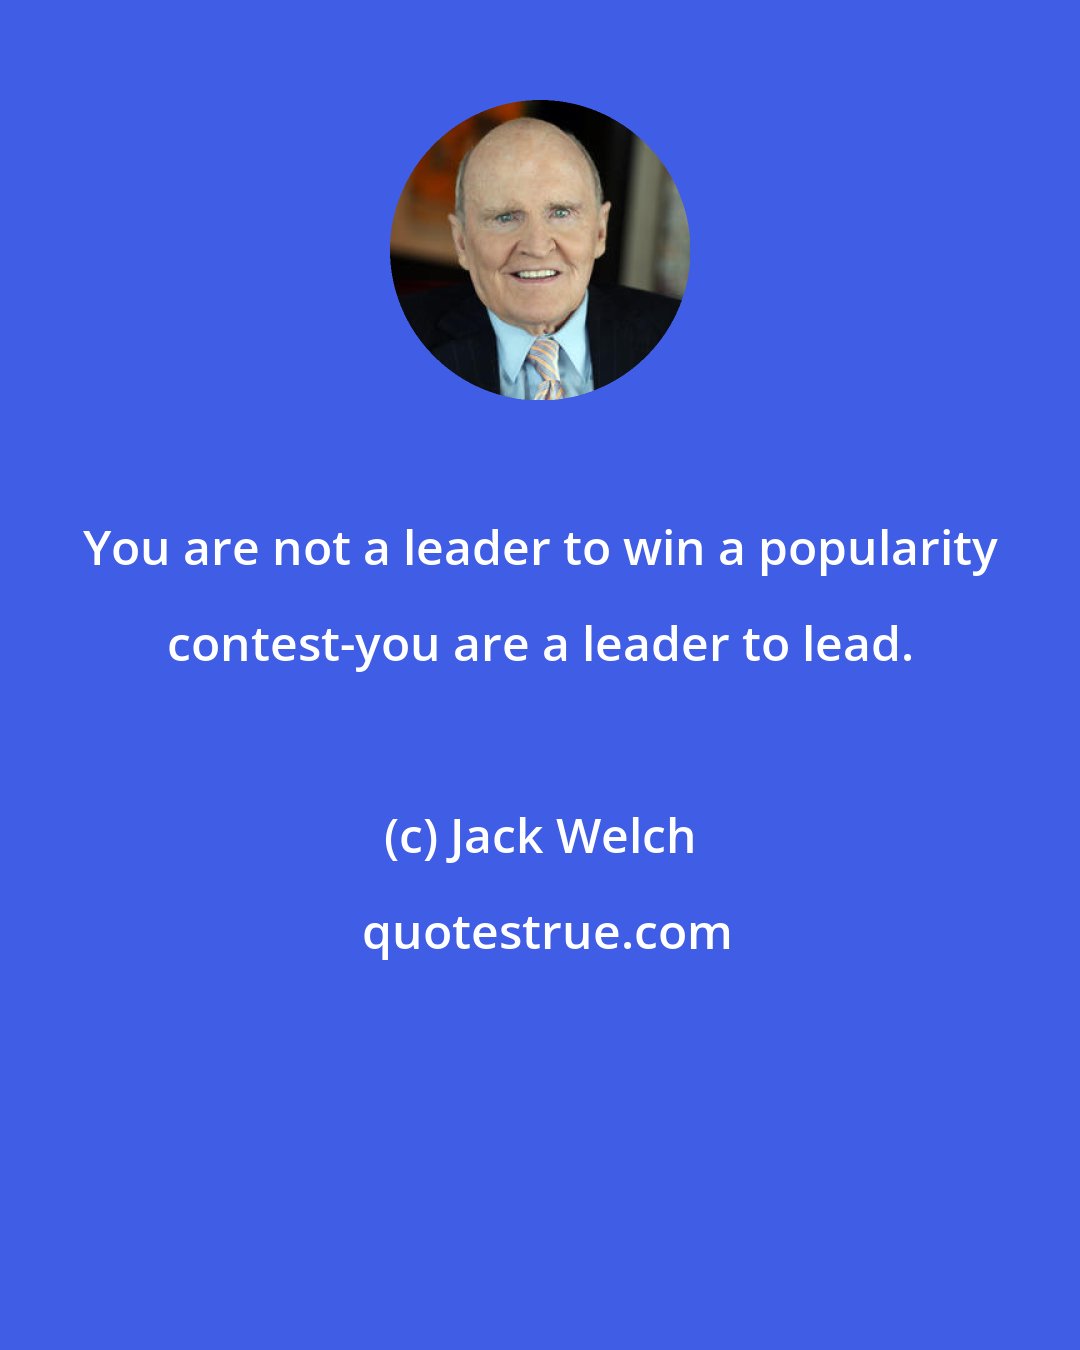 Jack Welch: You are not a leader to win a popularity contest-you are a leader to lead.